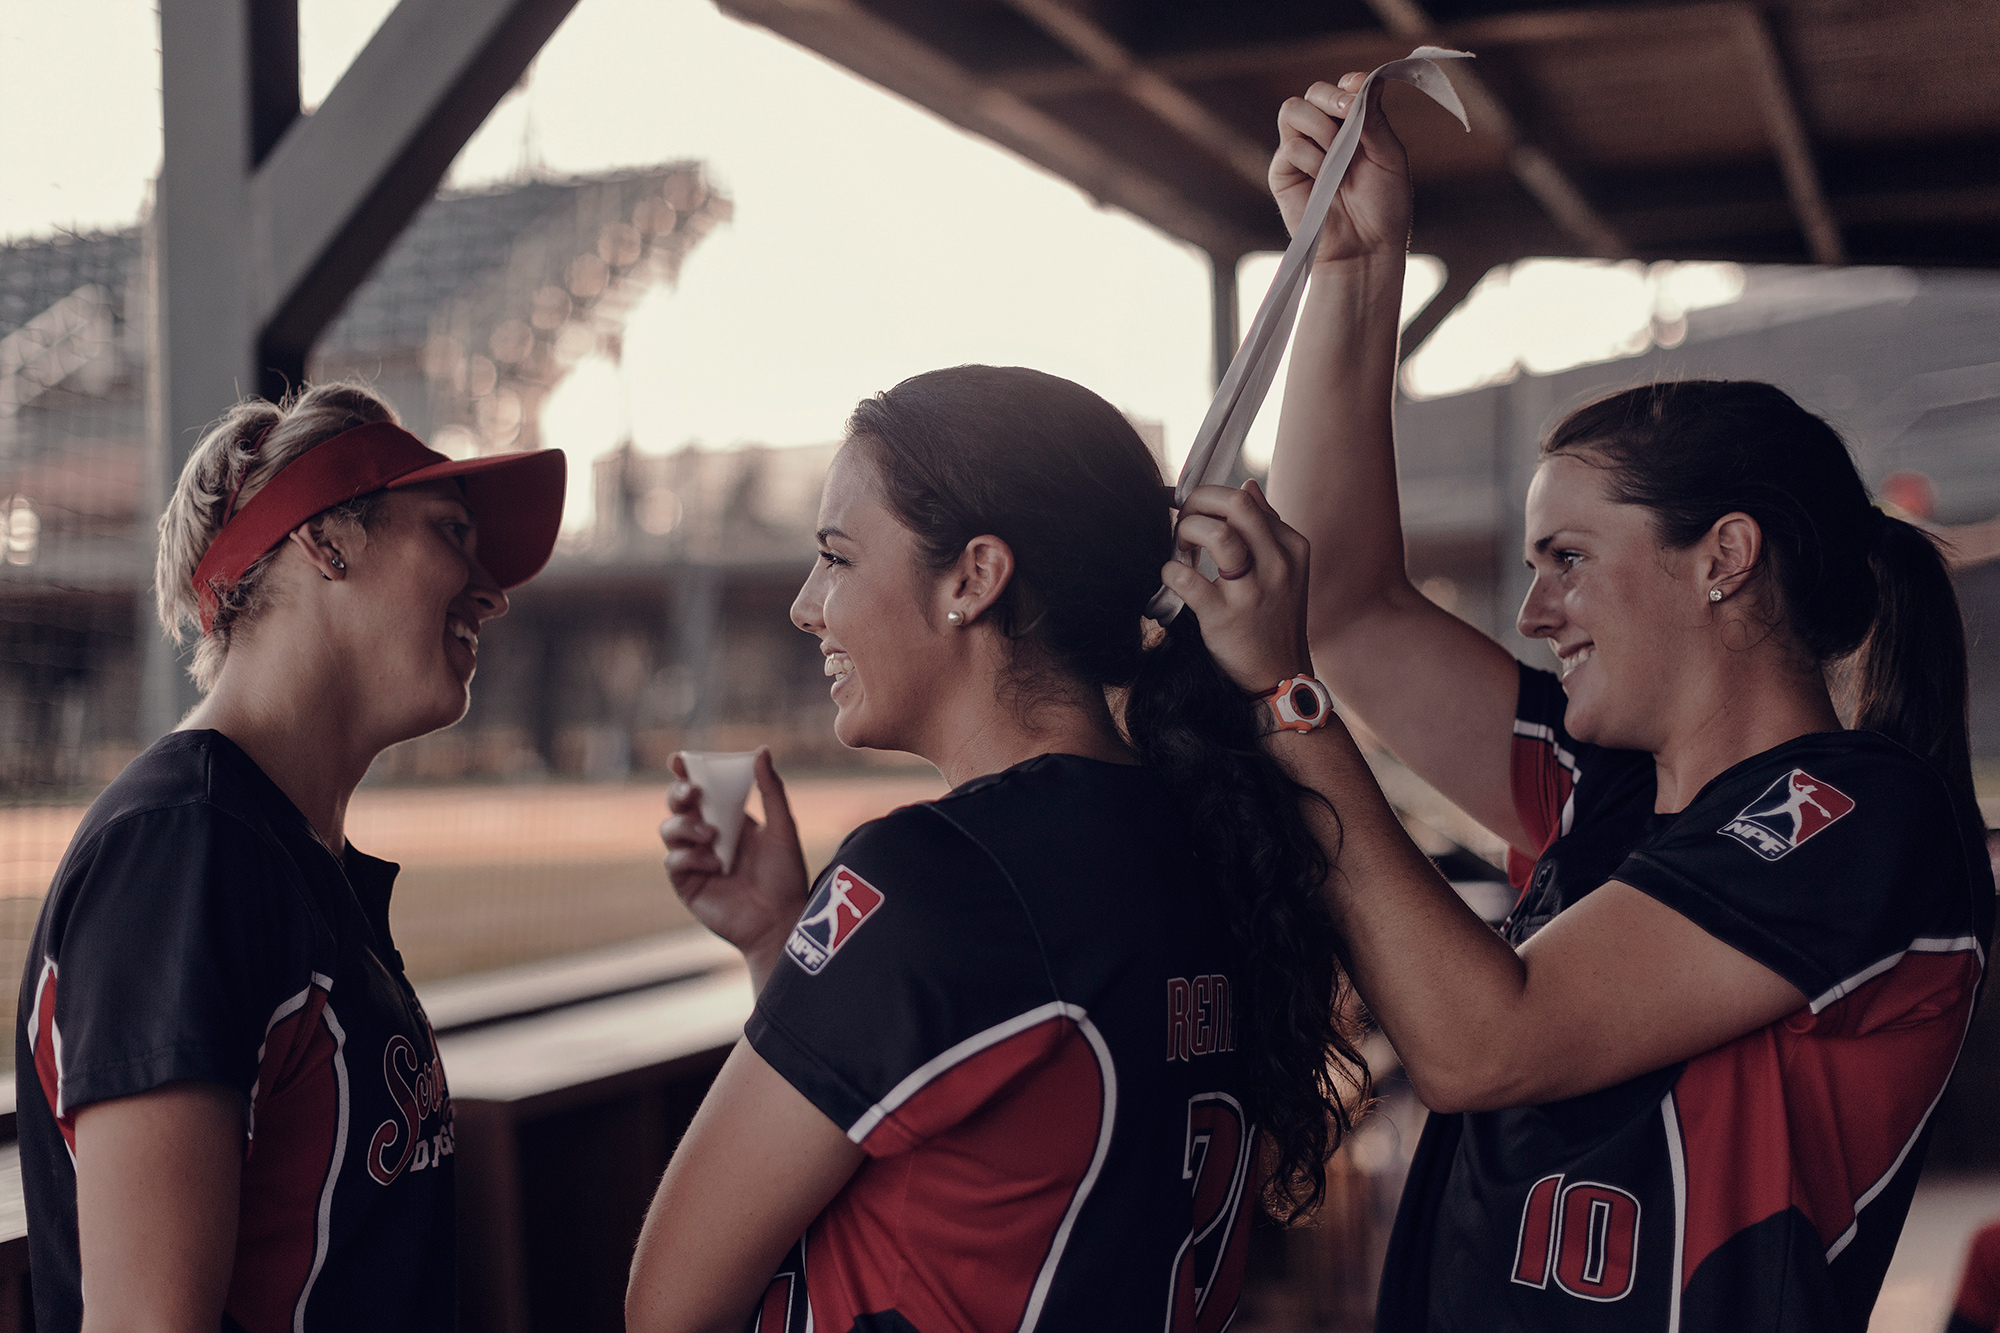 Teammates on the Scrap Yard Dawgs, a National Pro Fast Pitch softball team, photographed by lifestyle photographer, Todd Spoth, on location in Conroe, Texas.